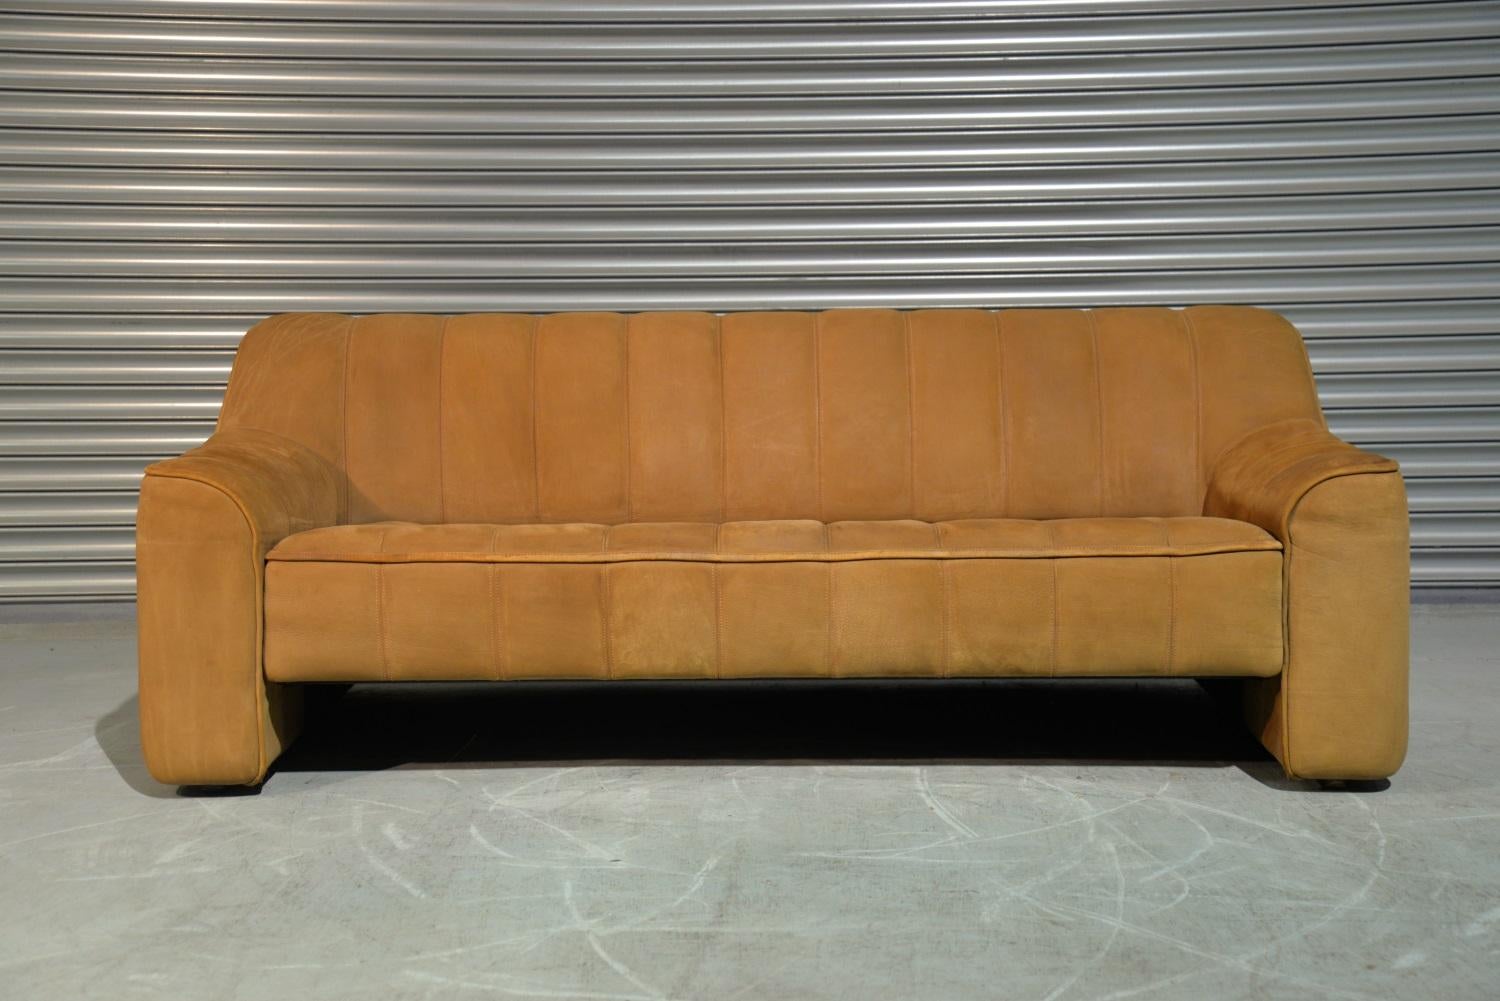 Discounted airfreight for our US and International customers ( from 2 weeks door to door )

We are delighted to bring to you to you a vintage 1970s De Sede DS 44 three-seat sofa and daybed in thick buffalo leather with a soft silky texture similar